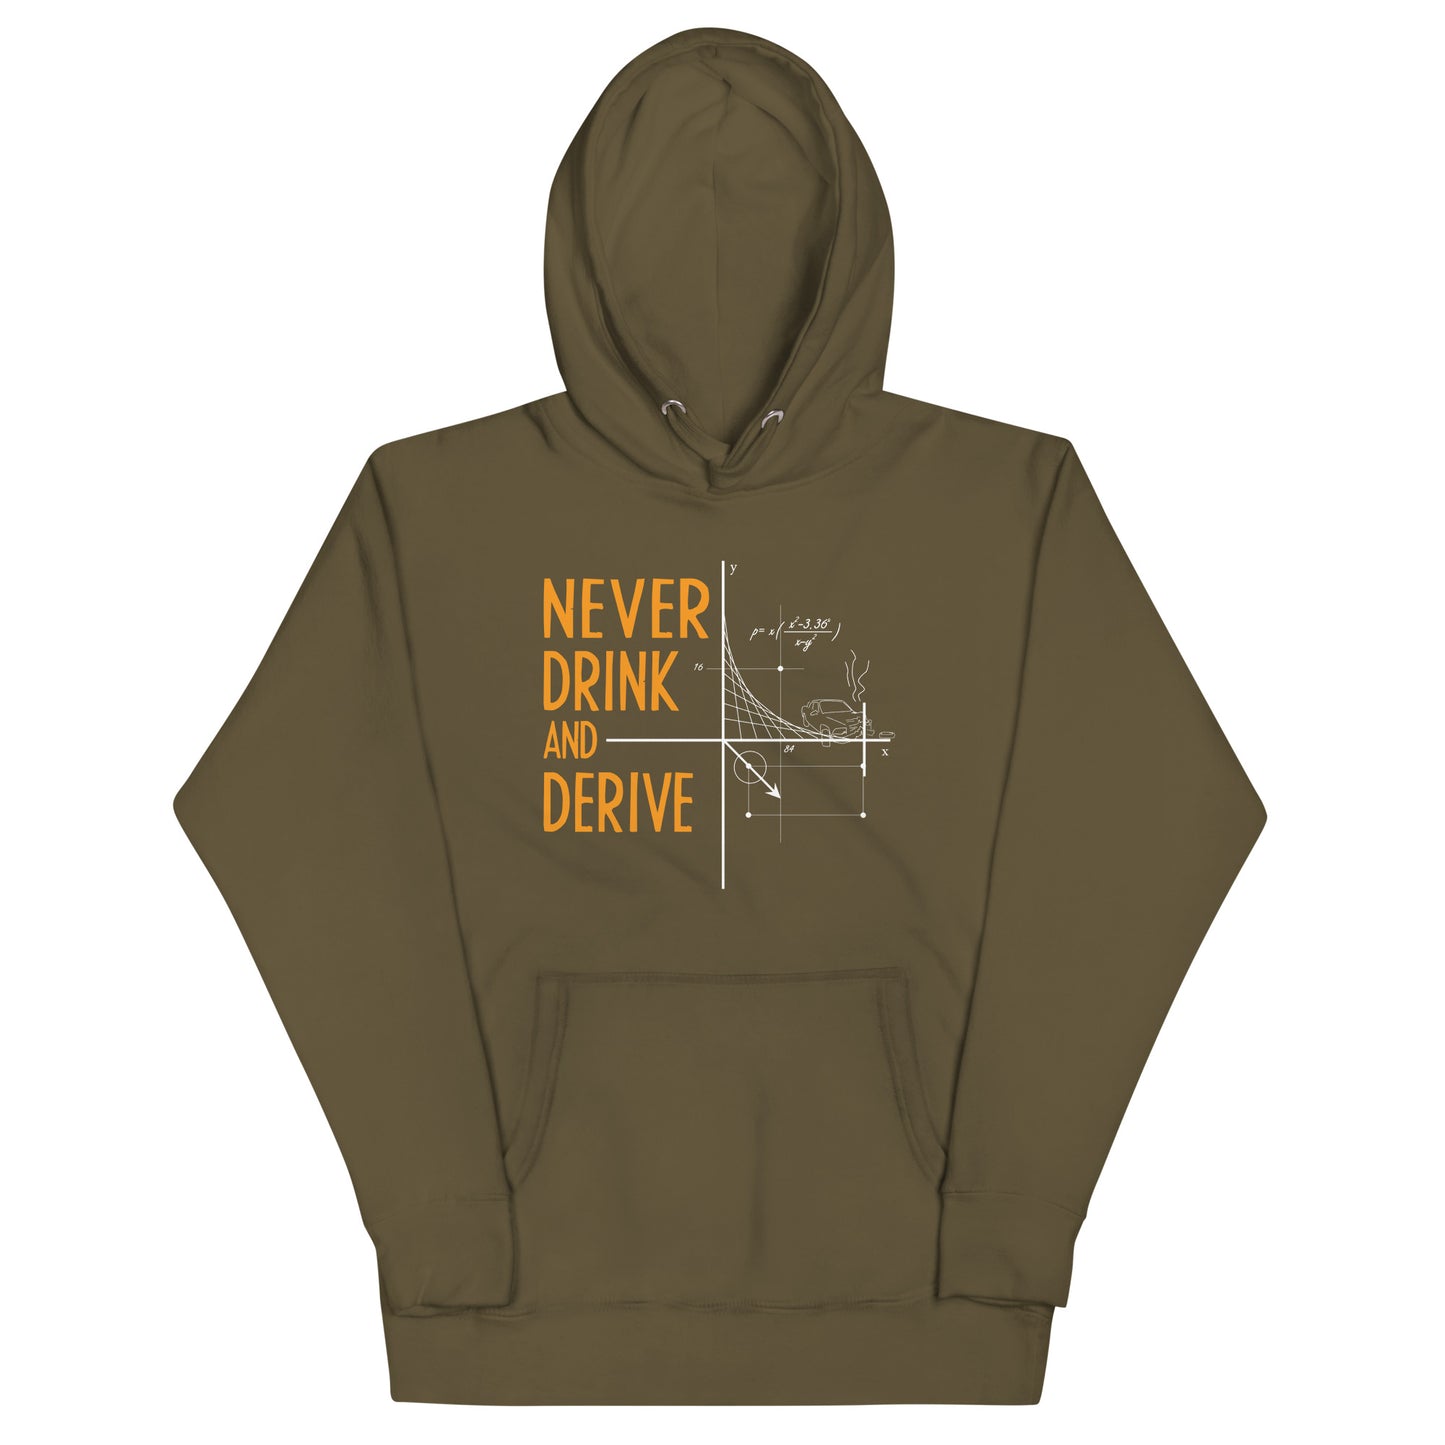 Never Drink and Derive Unisex Hoodie